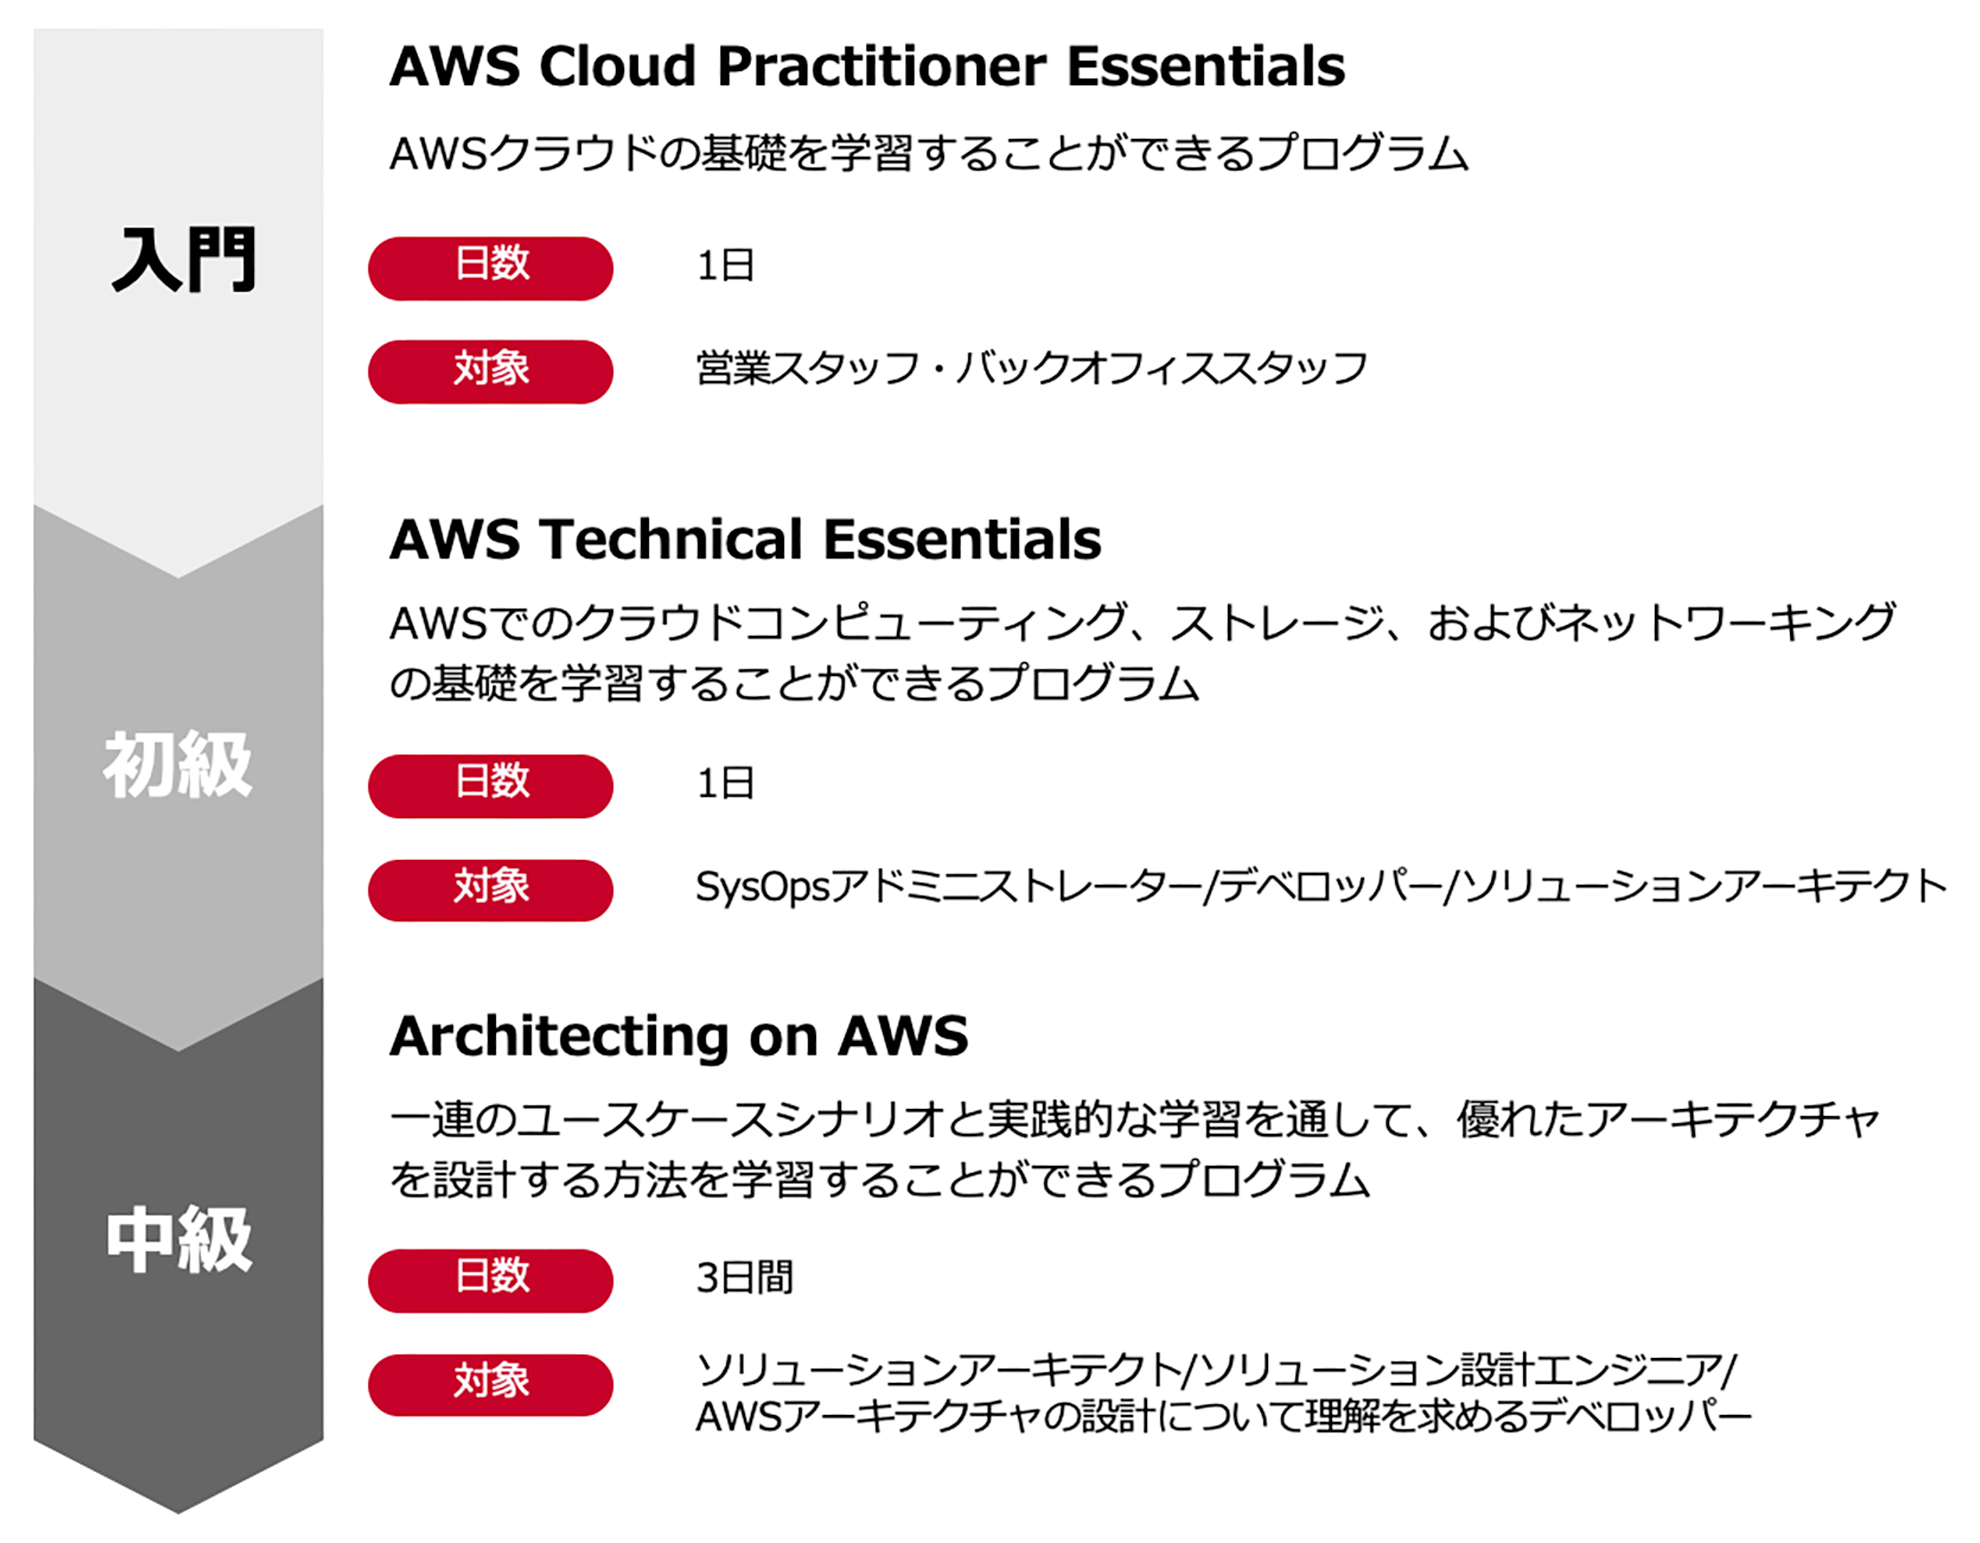 AWS Cloud Practitioner Essentials、AWS Technical Essentials、Architecting on AWS